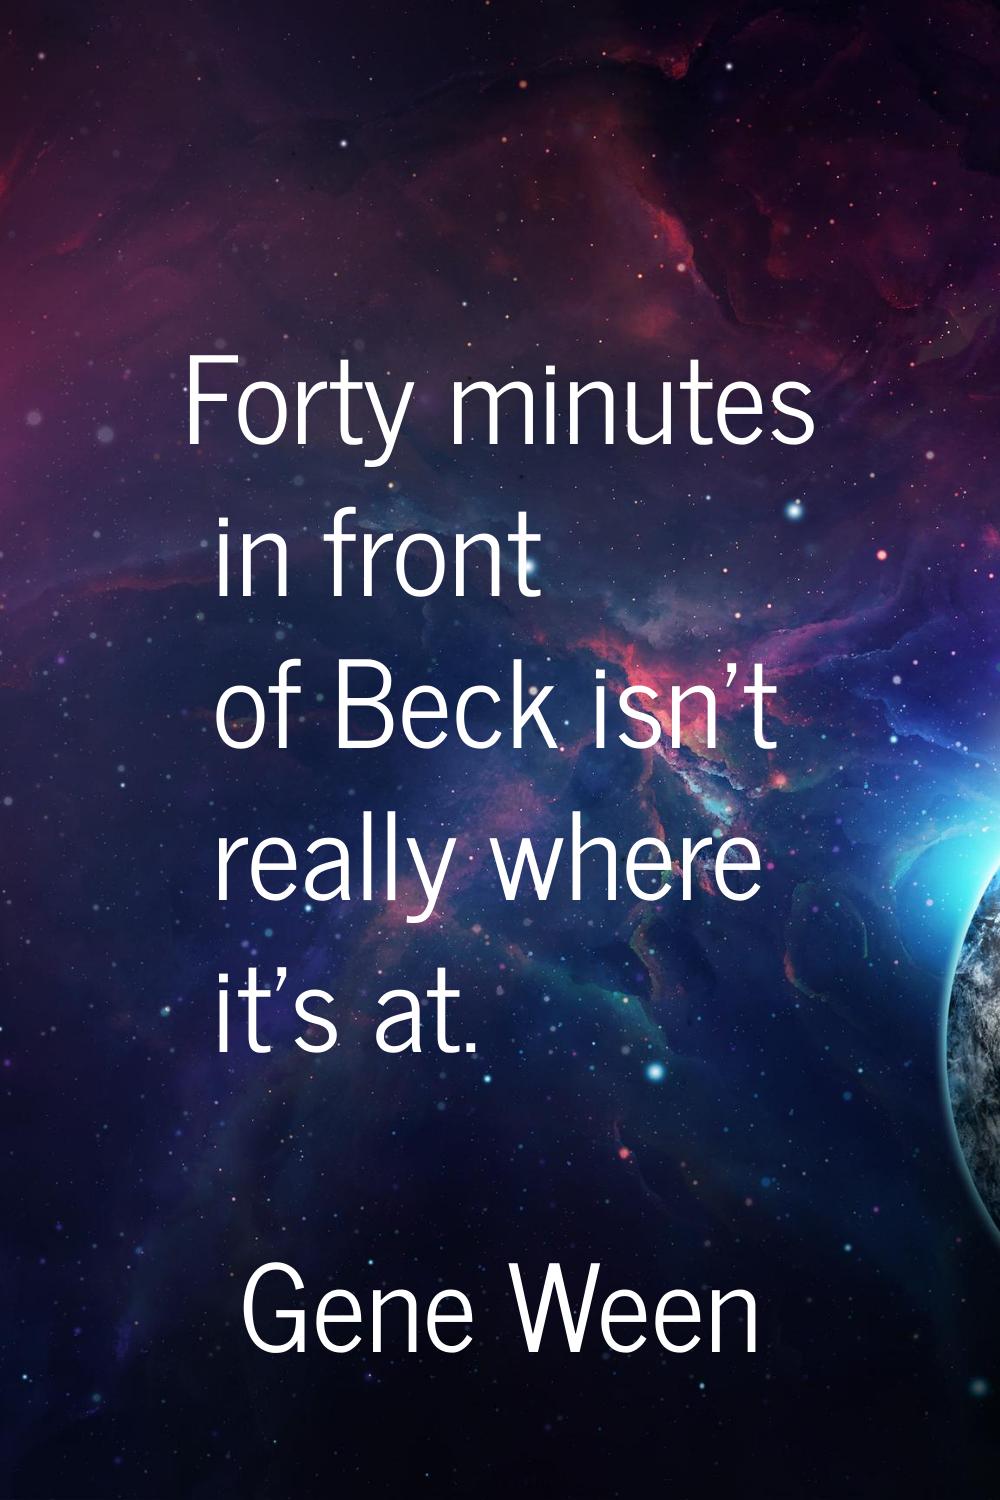 Forty minutes in front of Beck isn't really where it's at.